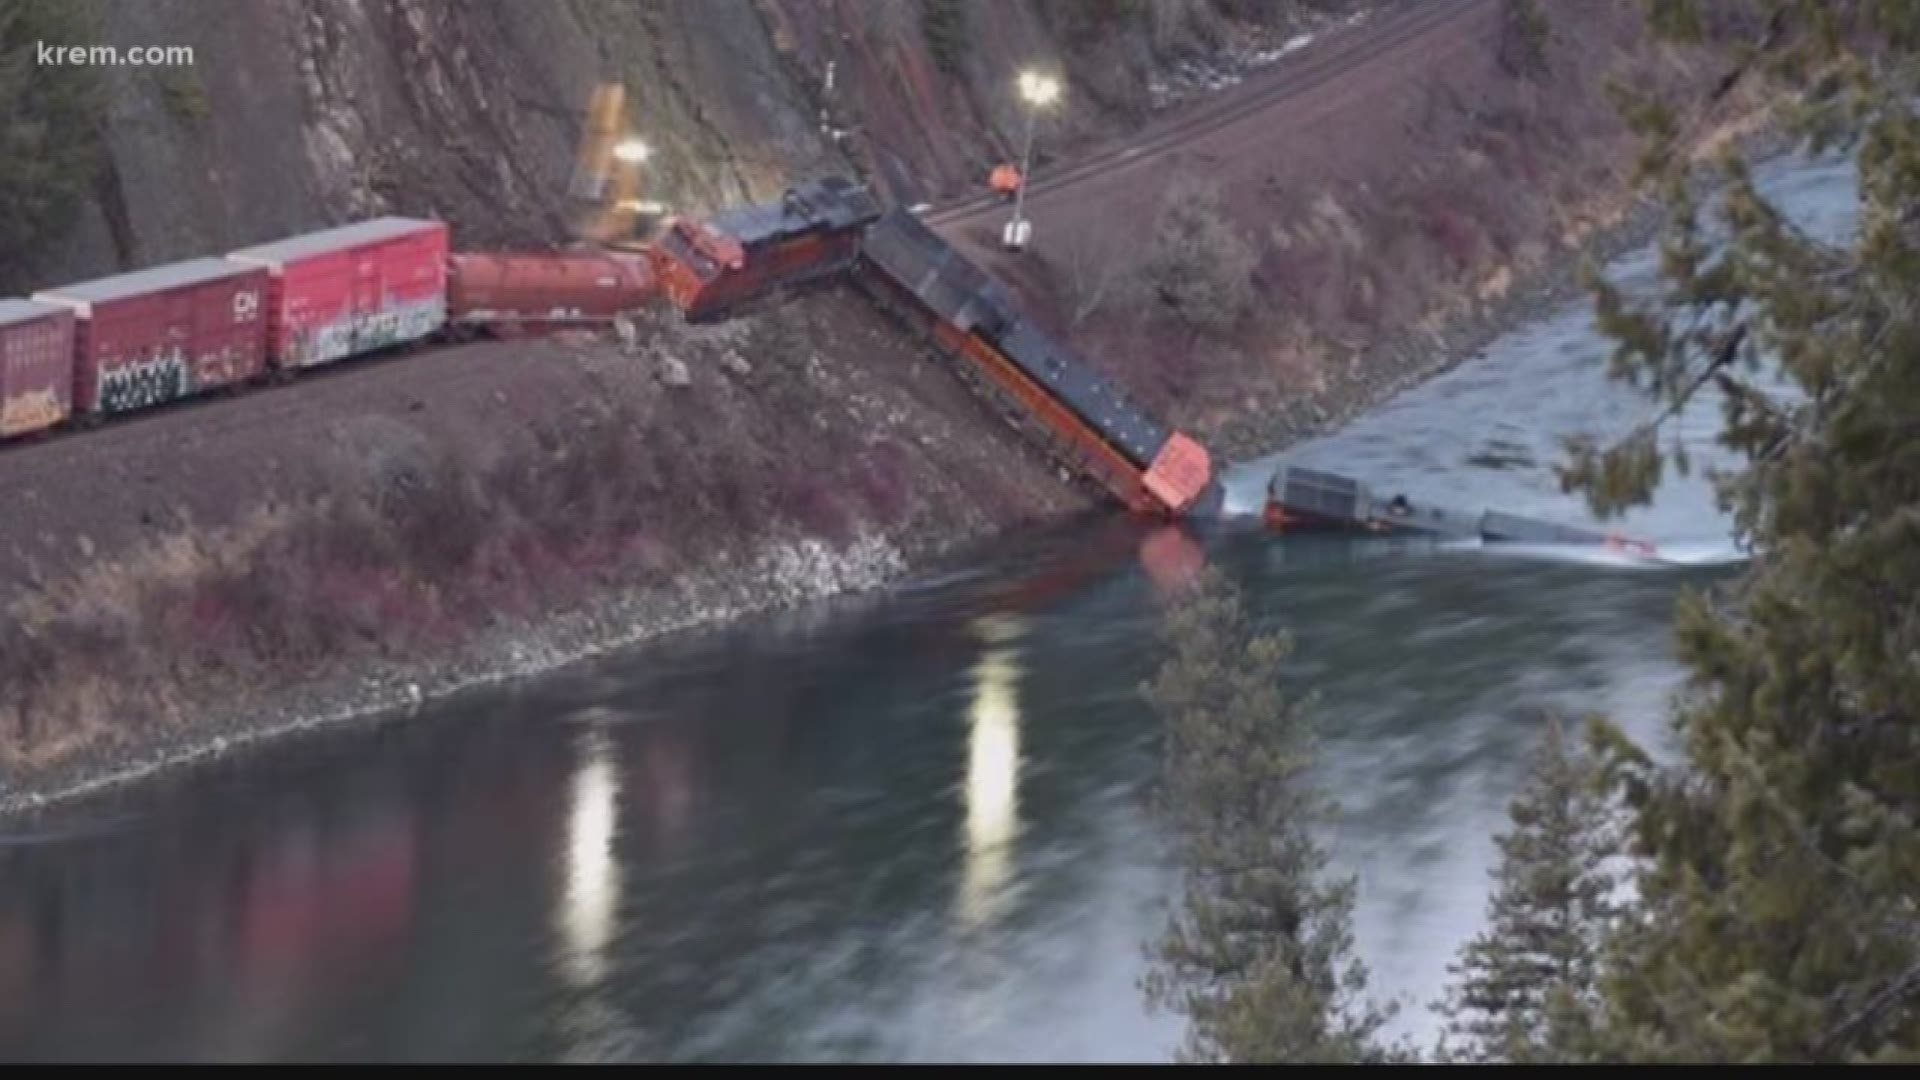 A BNSF train derailed into the Kootenai River in Boundary County. But how common are derailments in this part of North Idaho?